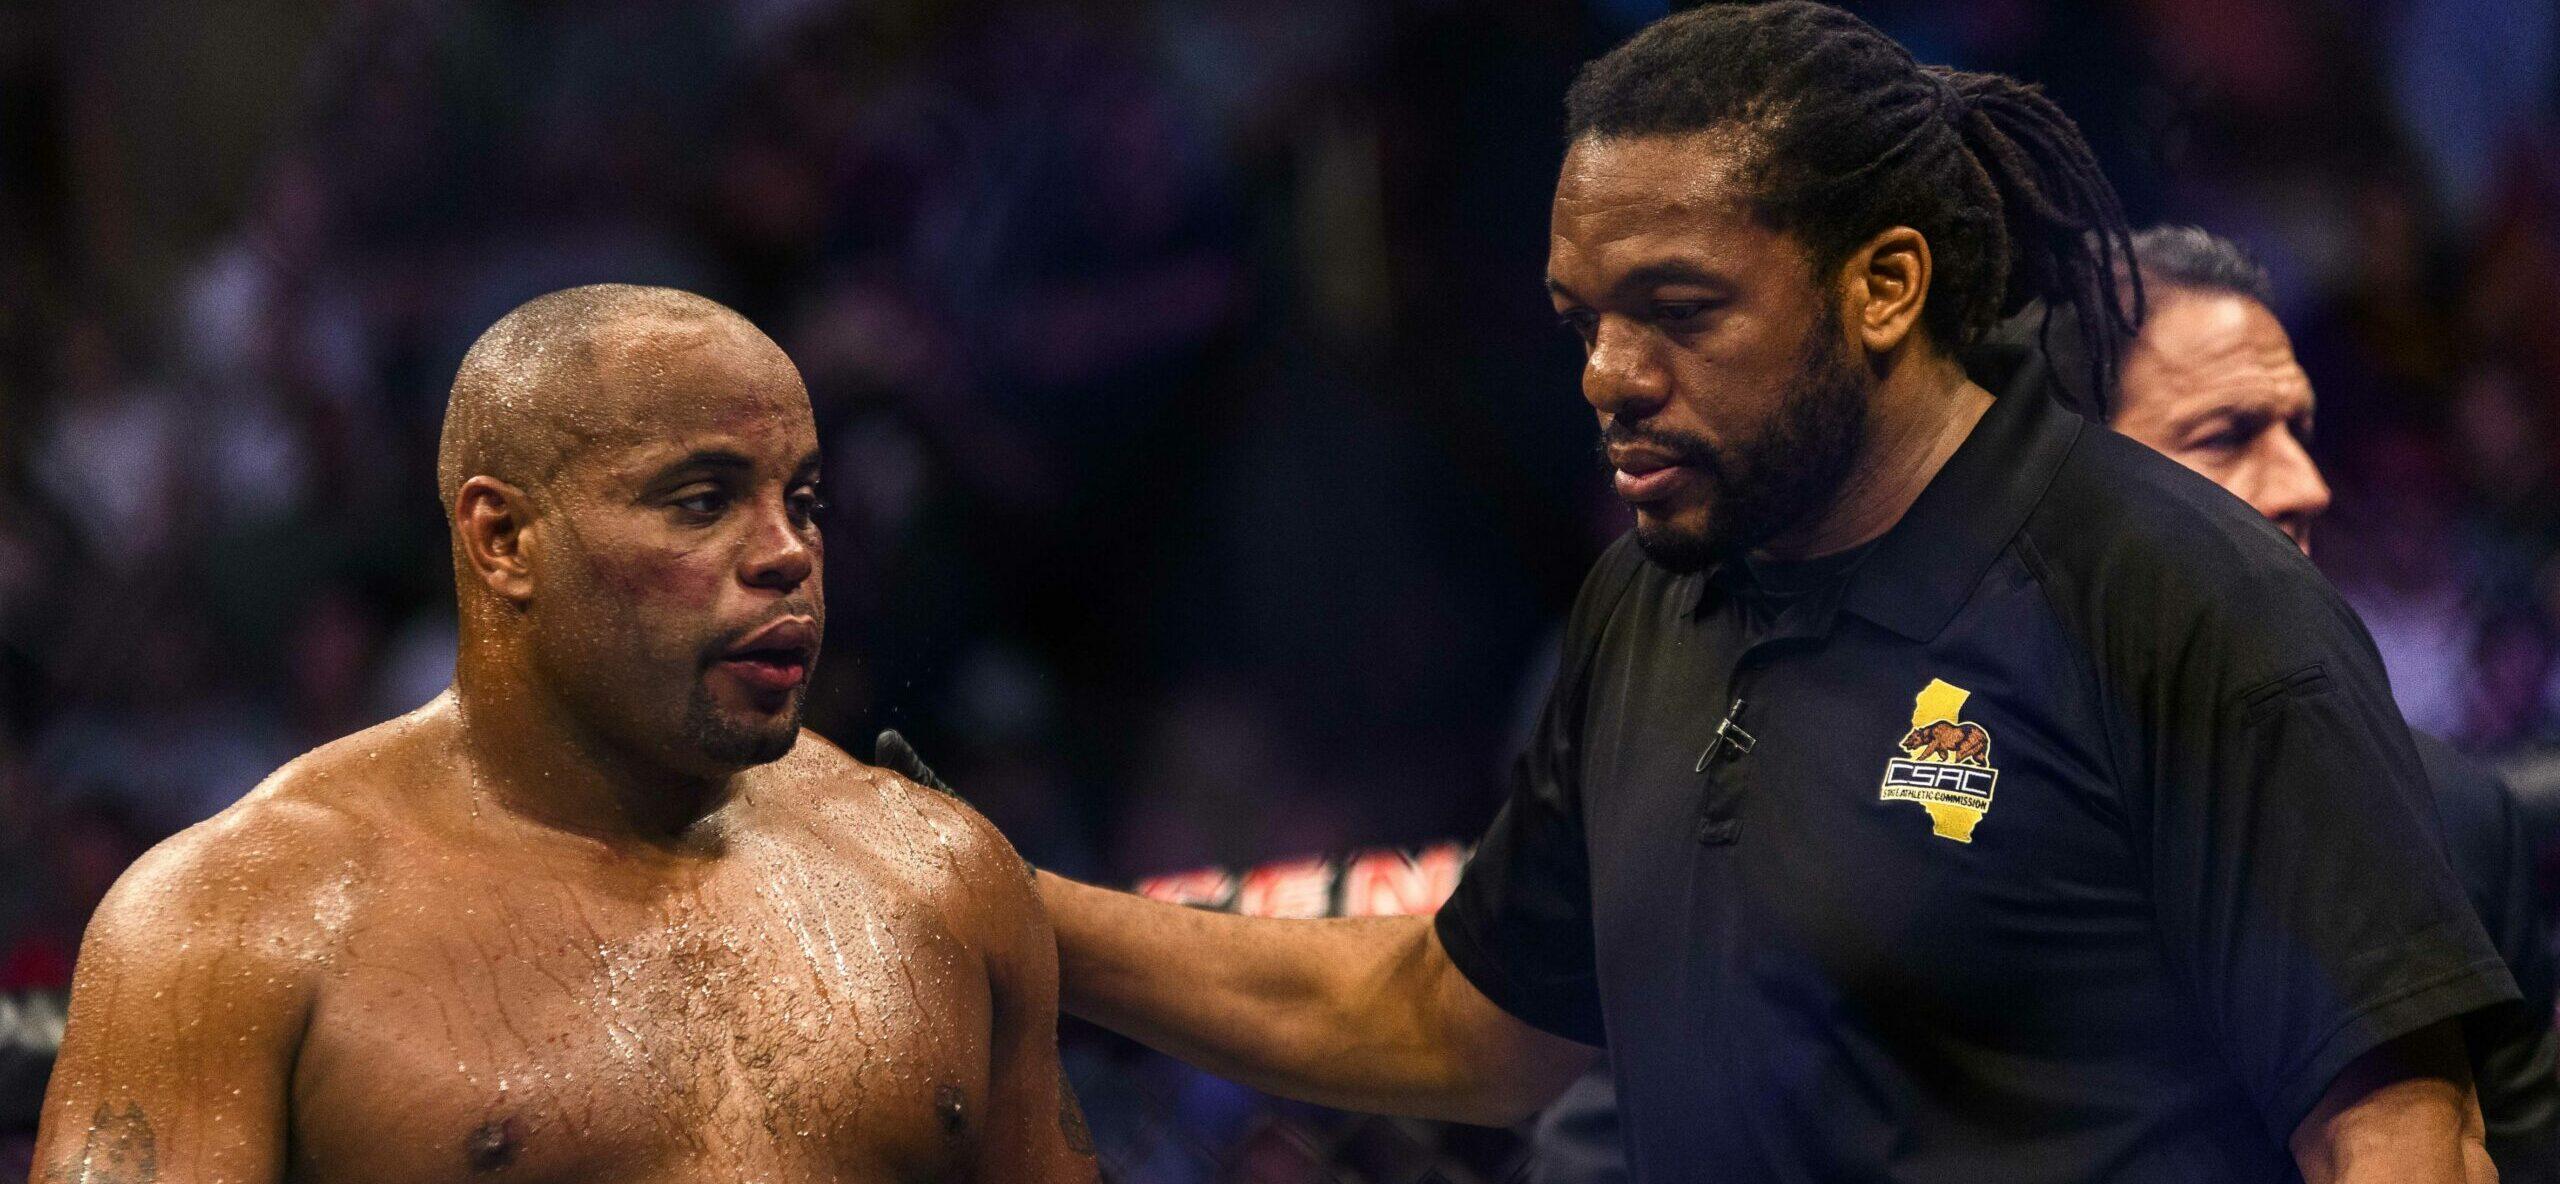 UFC’s Daniel Cormier Announced As Special Guest Referee For WWE Event